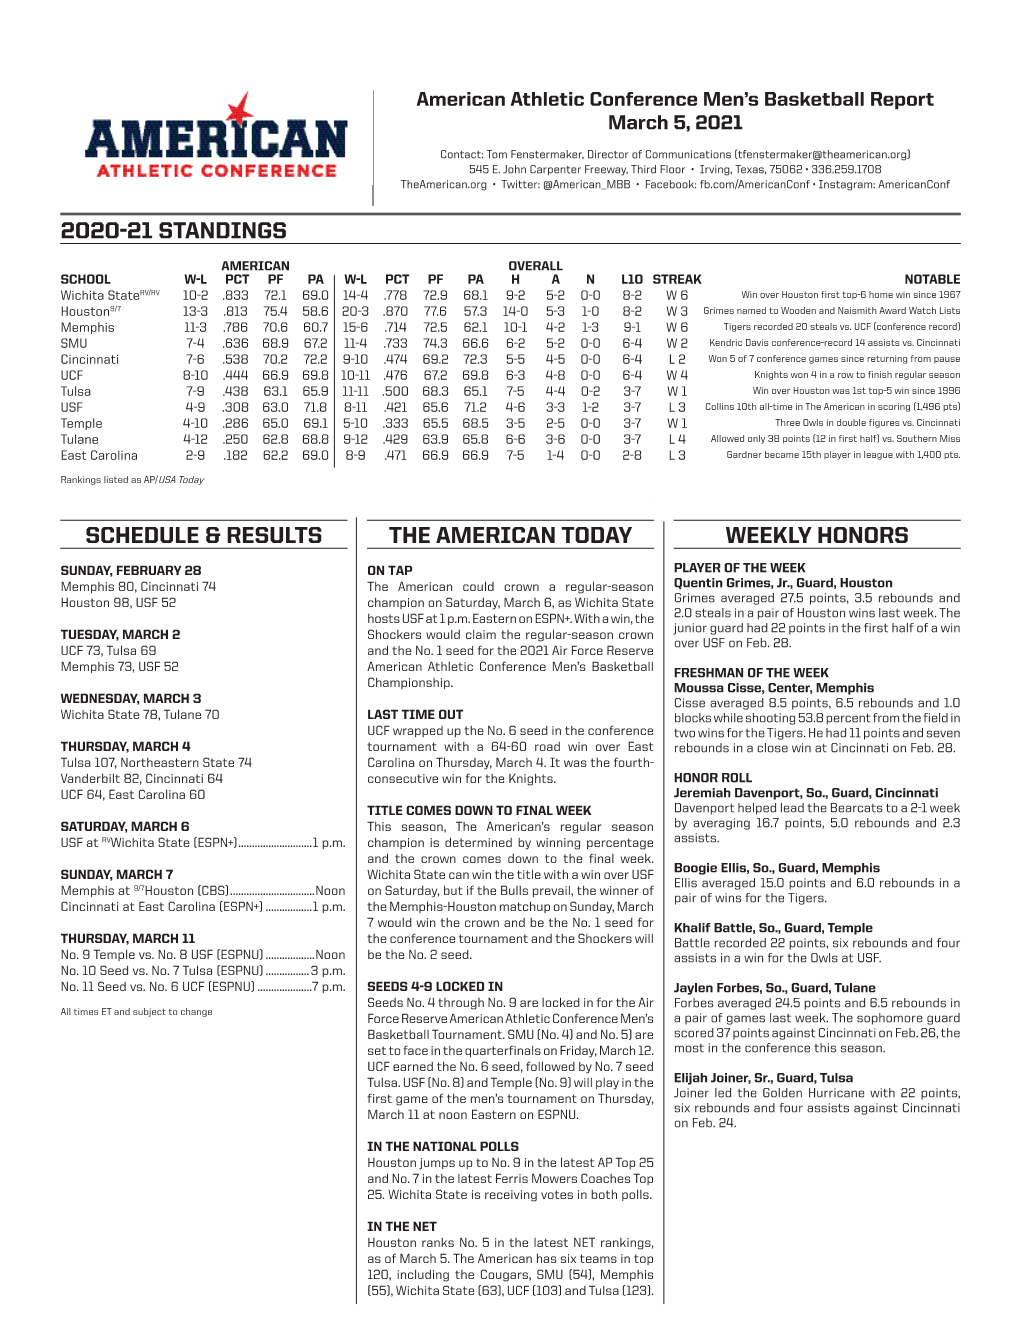 The American Today 2020-21 Standings Weekly Honors